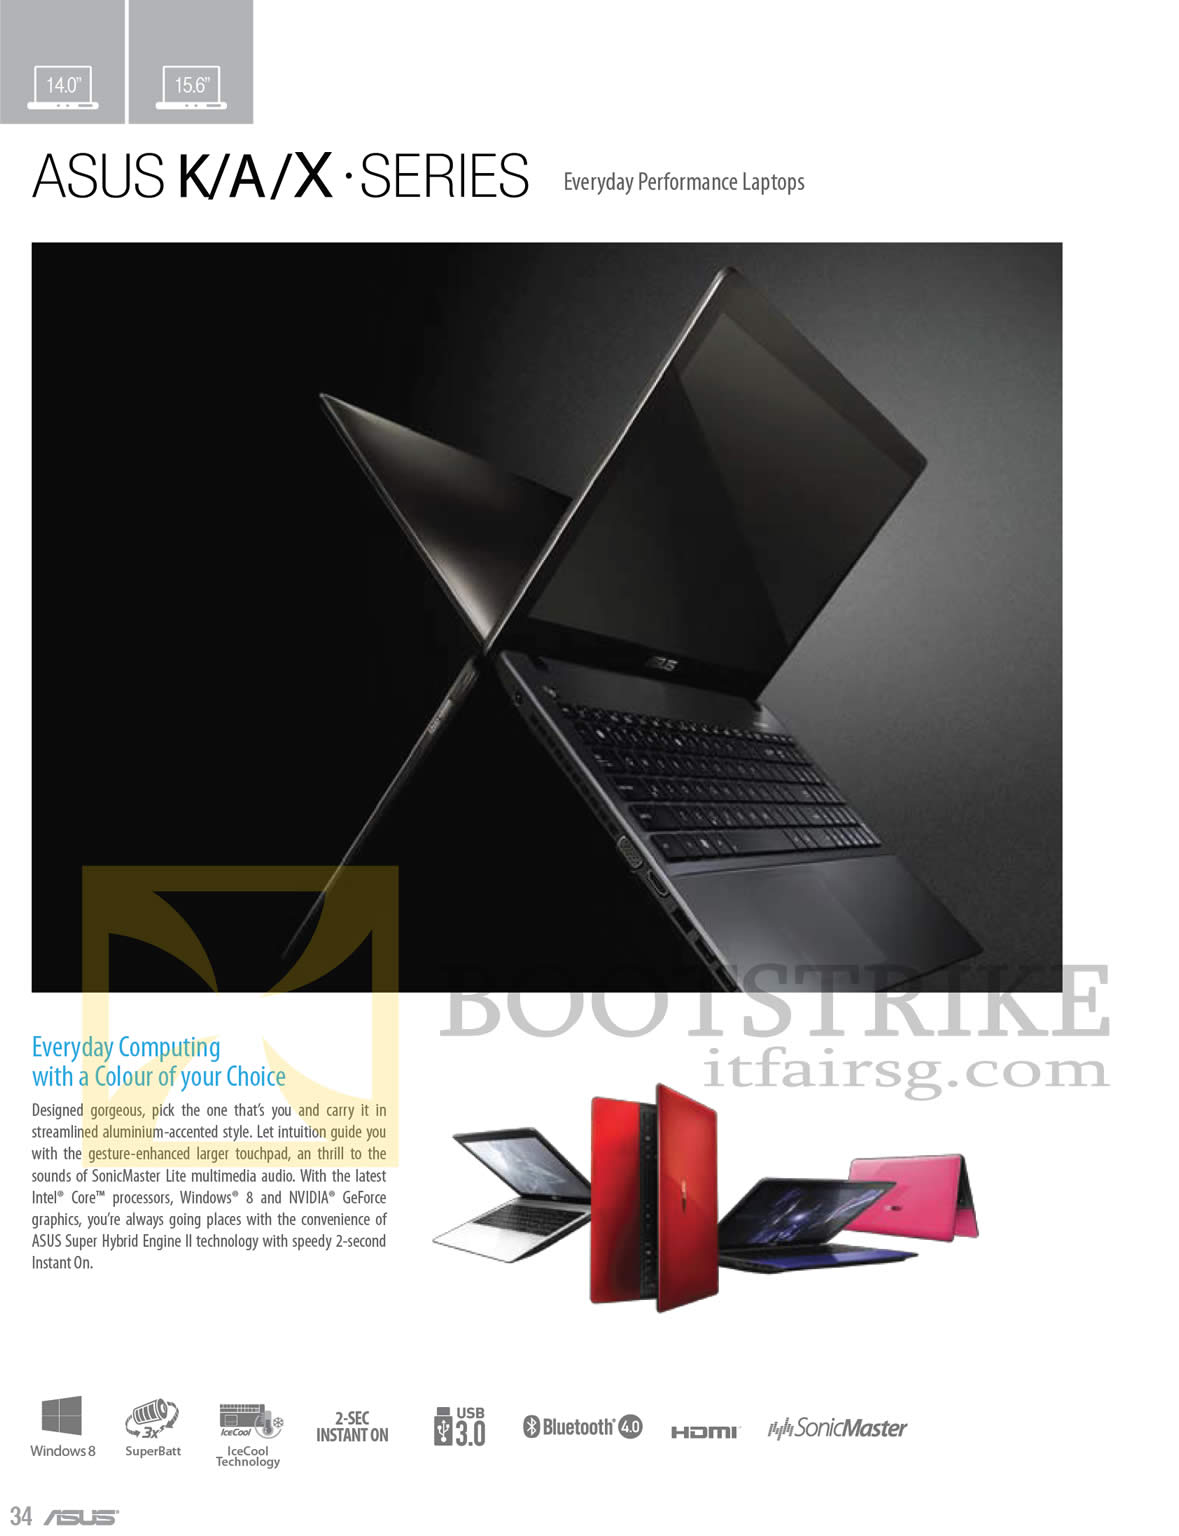 PC SHOW 2013 price list image brochure of ASUS Notebooks K, A, S Series Features